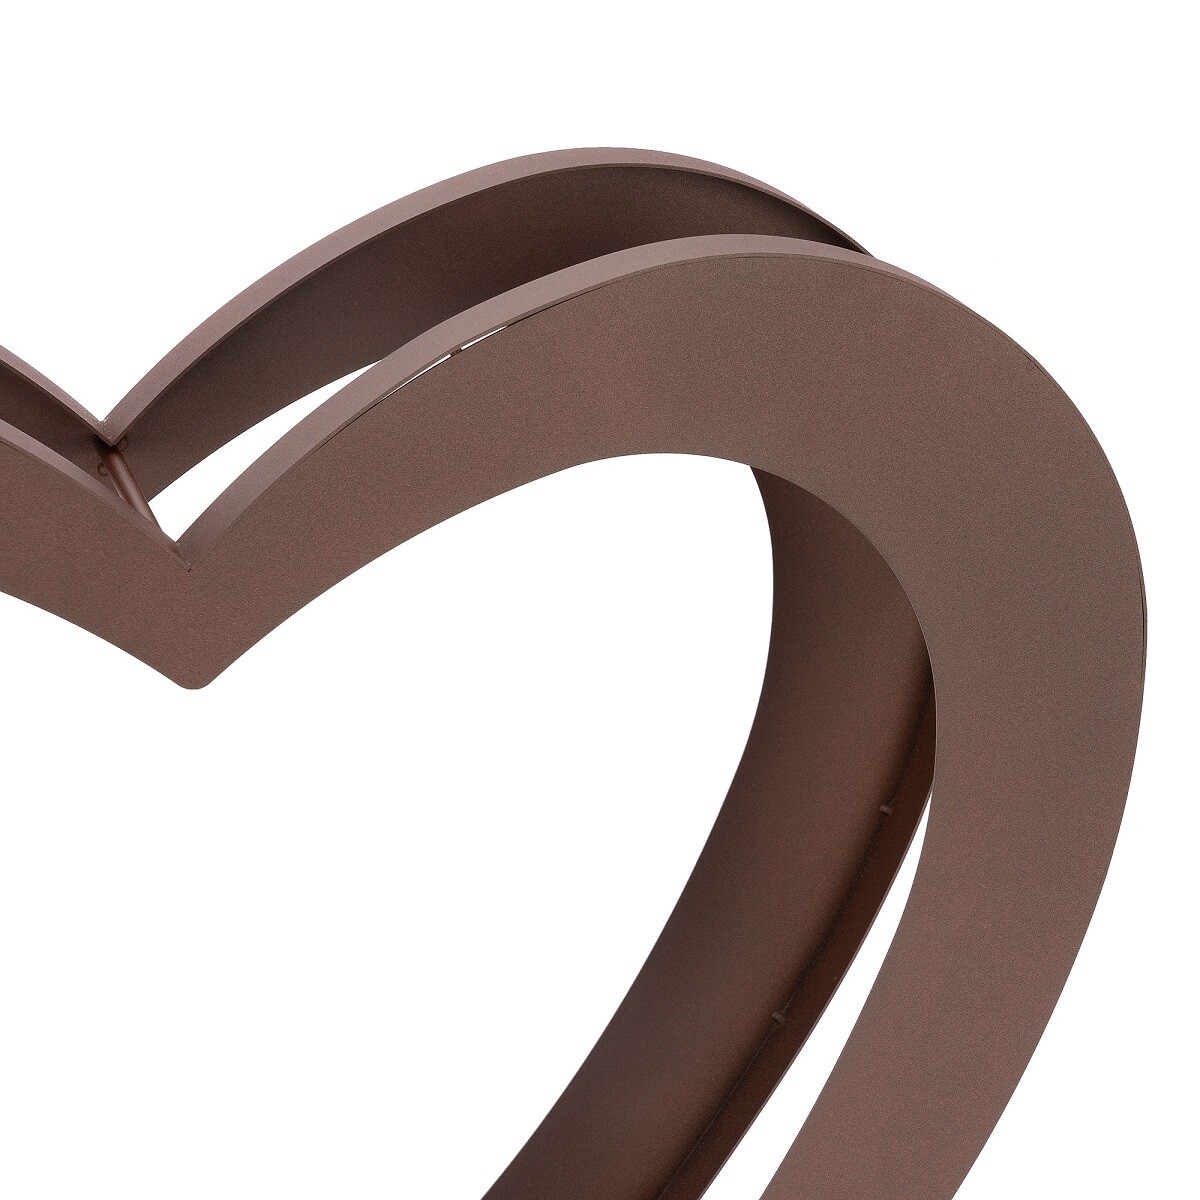 Heart shaped log holder of highest quality with flawless rust-brown powder coating